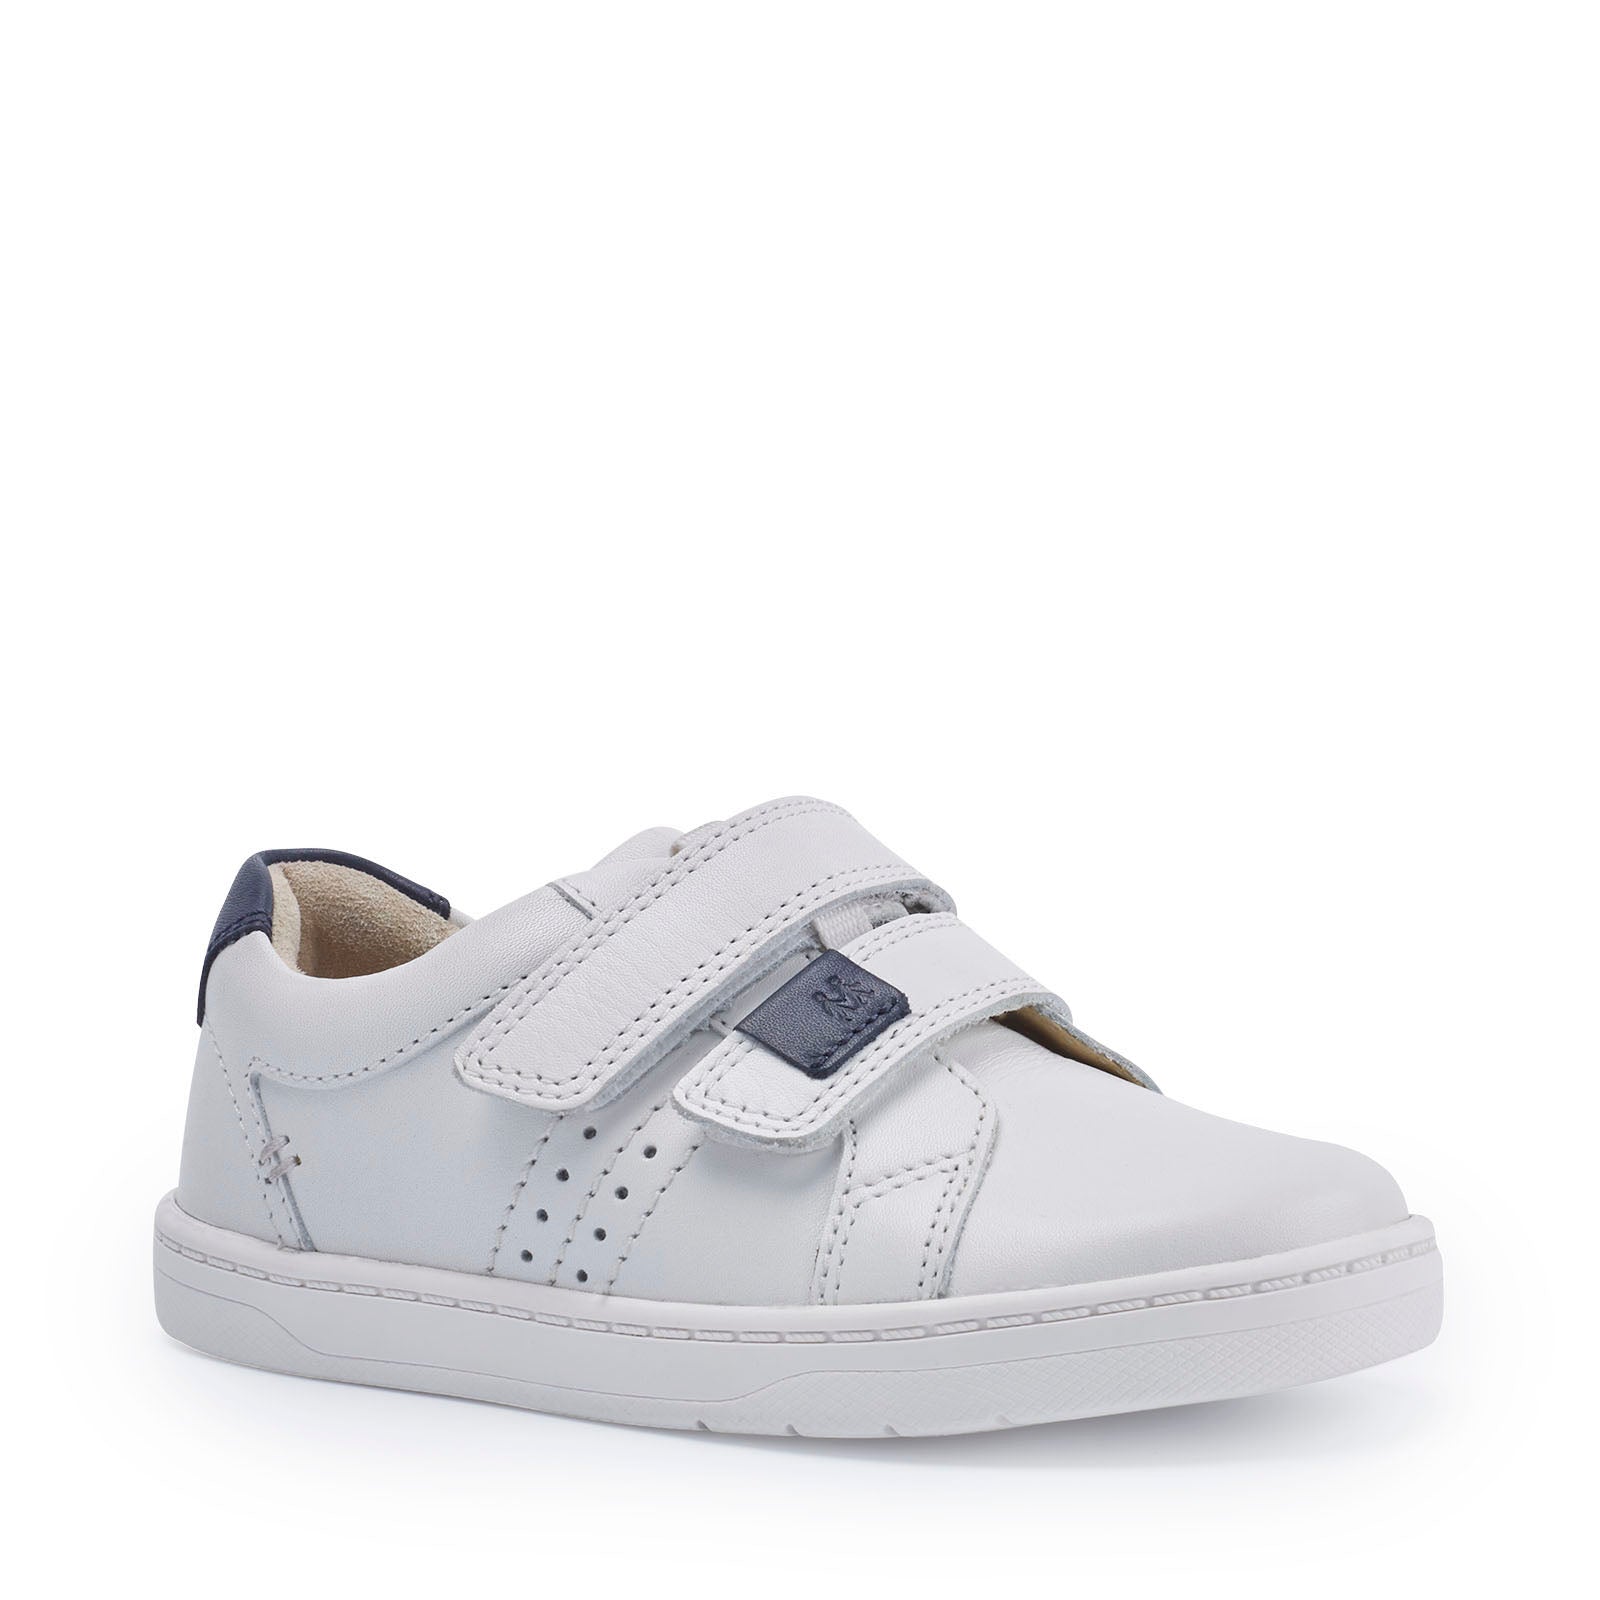 Start-Rite Explore 1742_4 Boys White Leather Touch Fastening Trainers